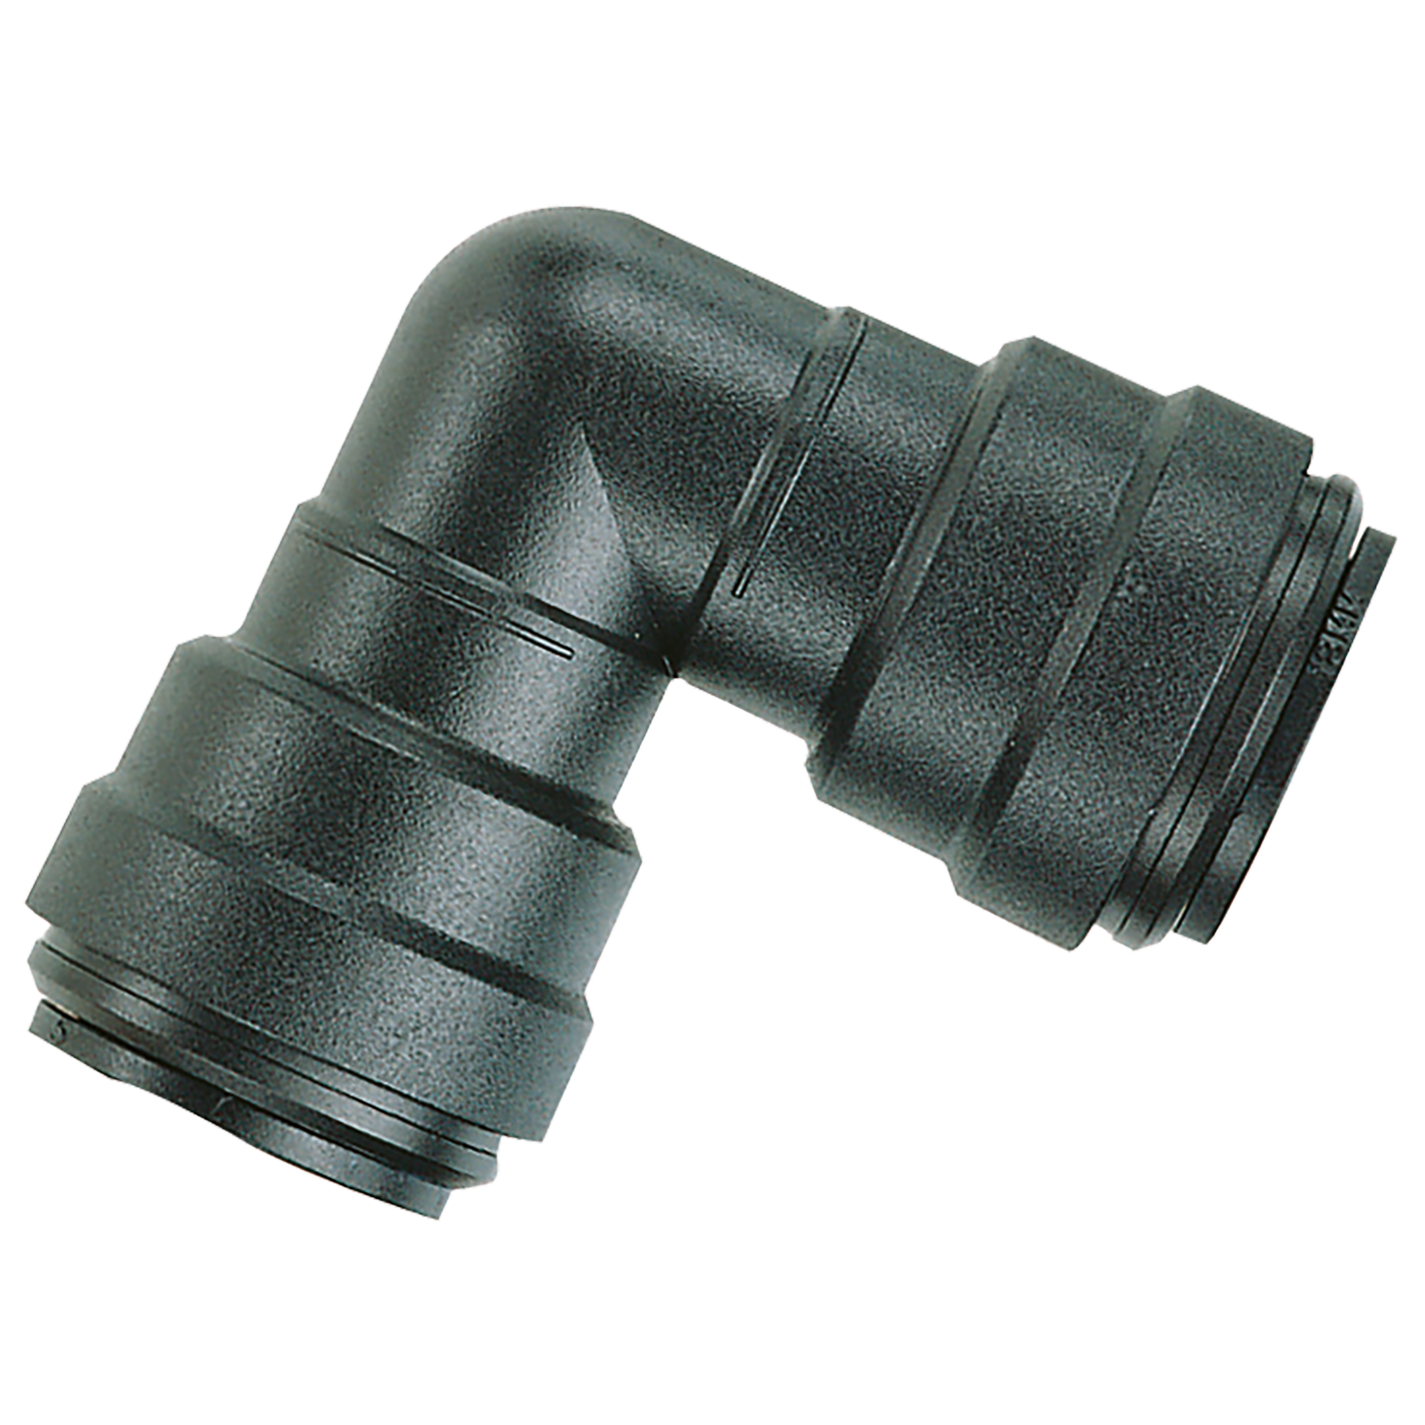 28MM OD EQUAL ELBOW CONNECTOR